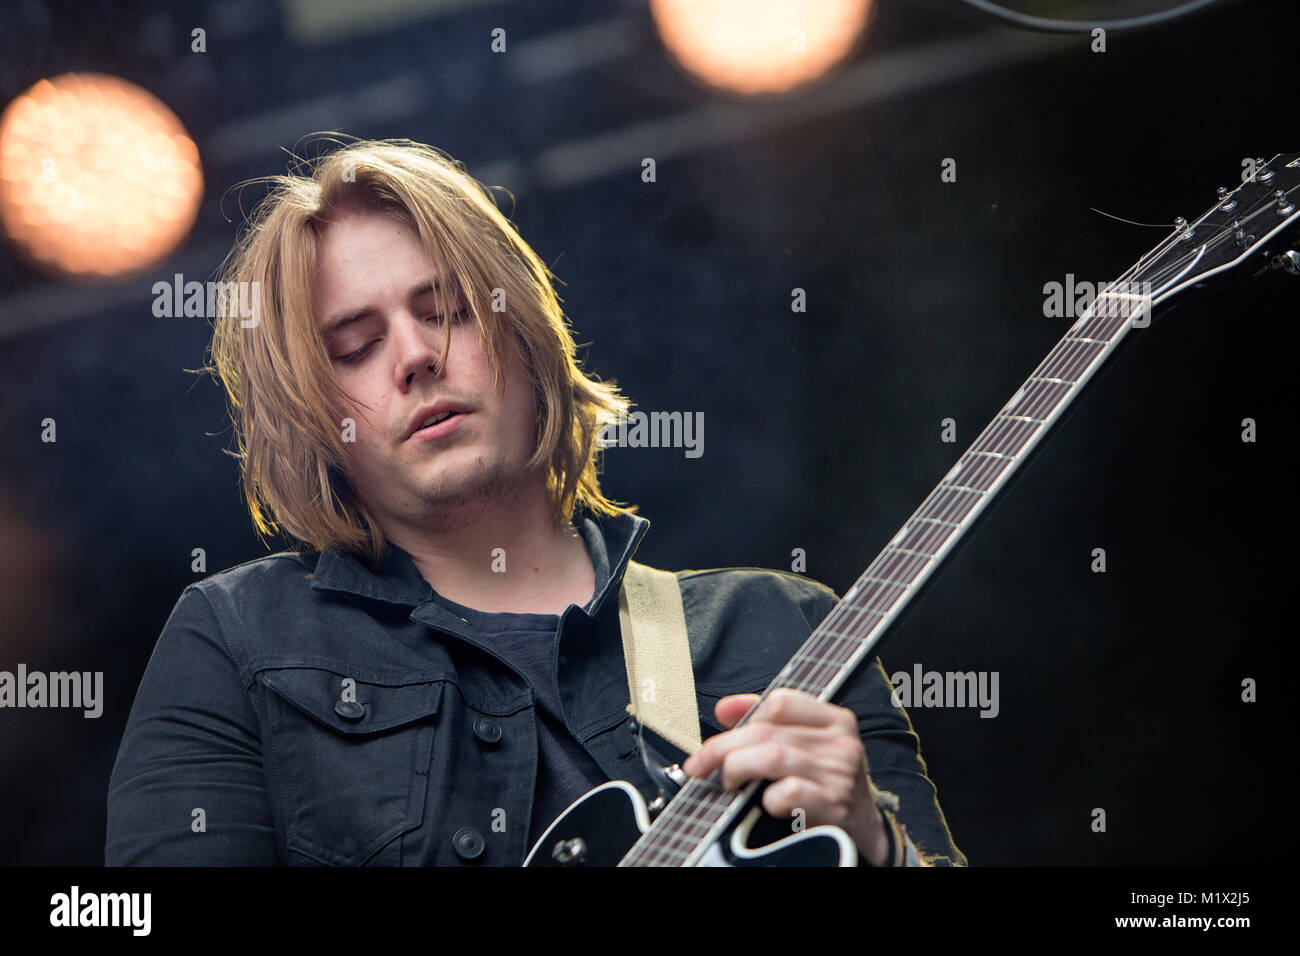 The English alternative rock band Nothing but Thieves performs a live concert at the Norwegian music festival Bergenfest 2016. Here guitarist Joe Langridge-Brown is seen live on stage. Norway, 16/06 2016. Stock Photo